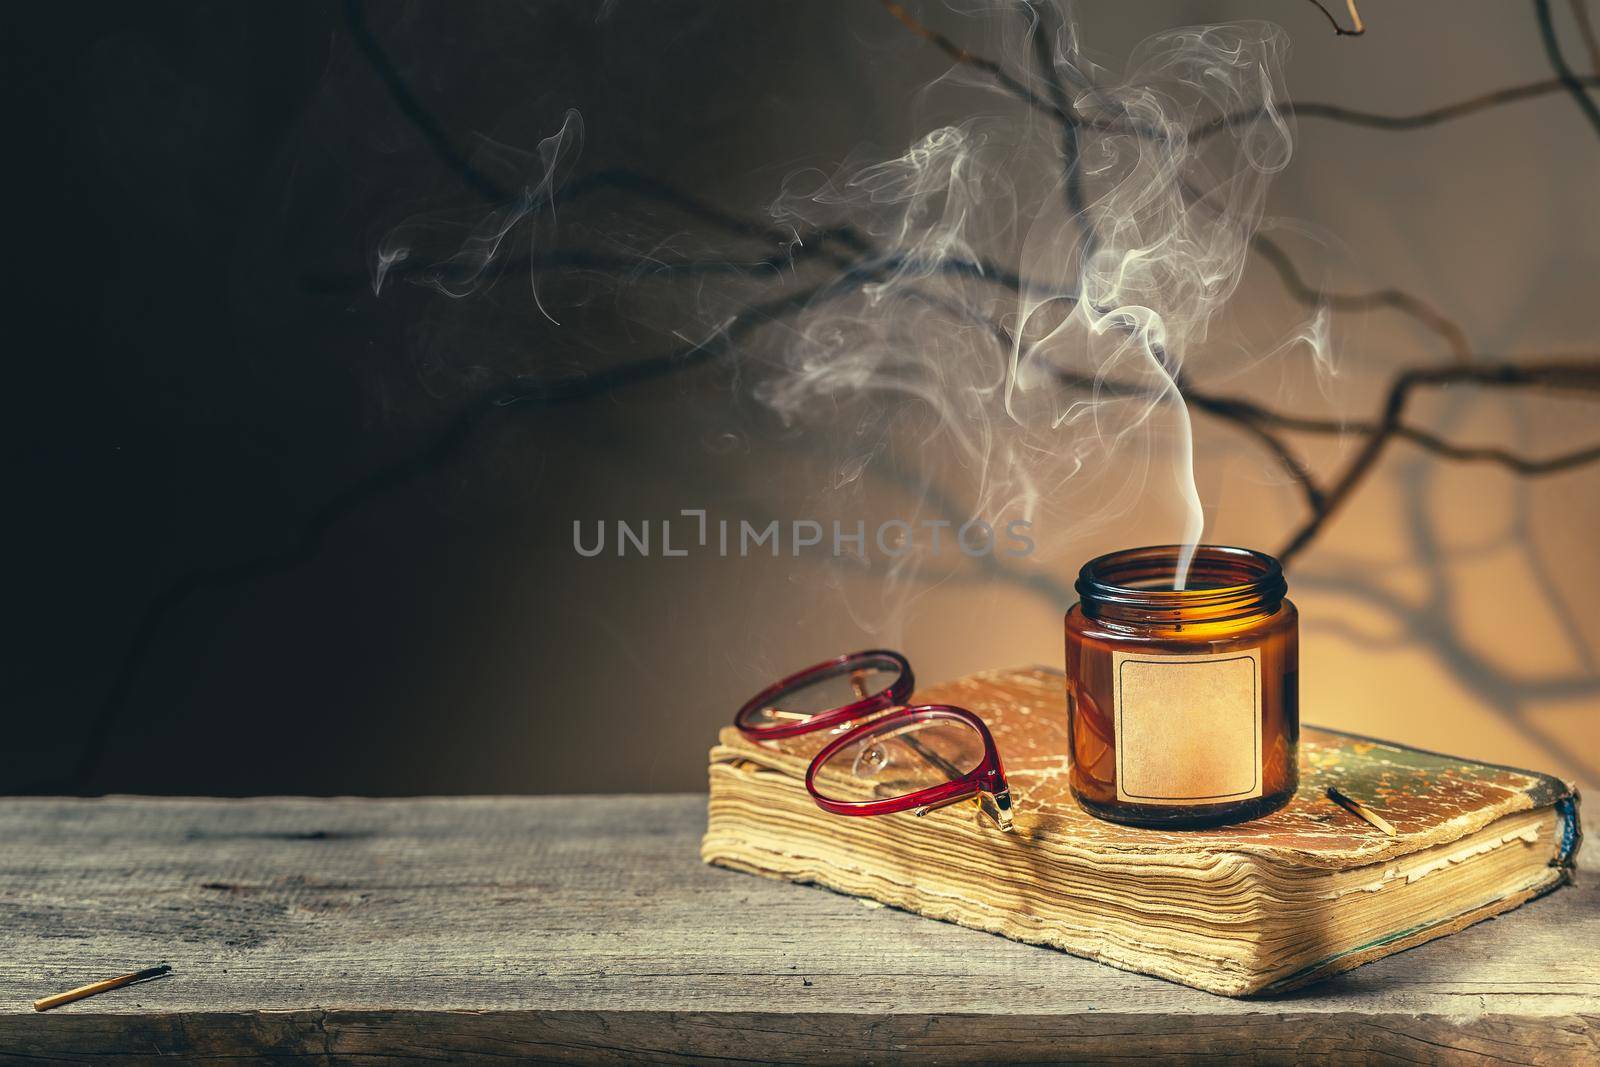 Vintage background with an old antique book, glasses and recently blown candle at night. Tree brunches and shadows make spooky dark academia mood. Cozy fall season reading time